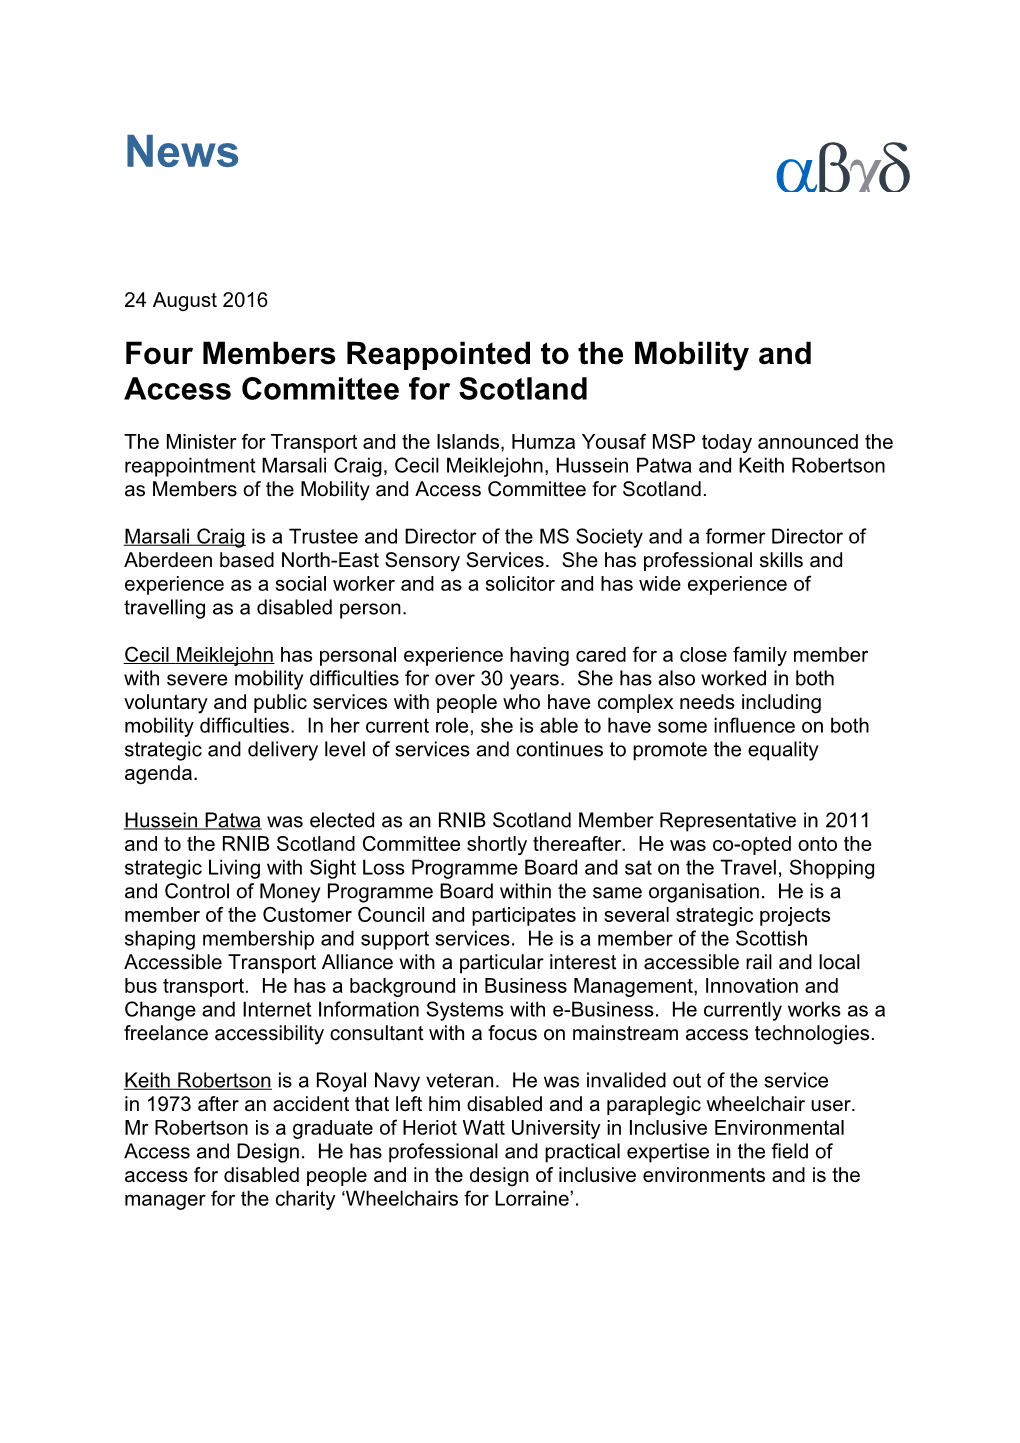 Fourmembers Reappointed to the Mobility and Access Committee for Scotland